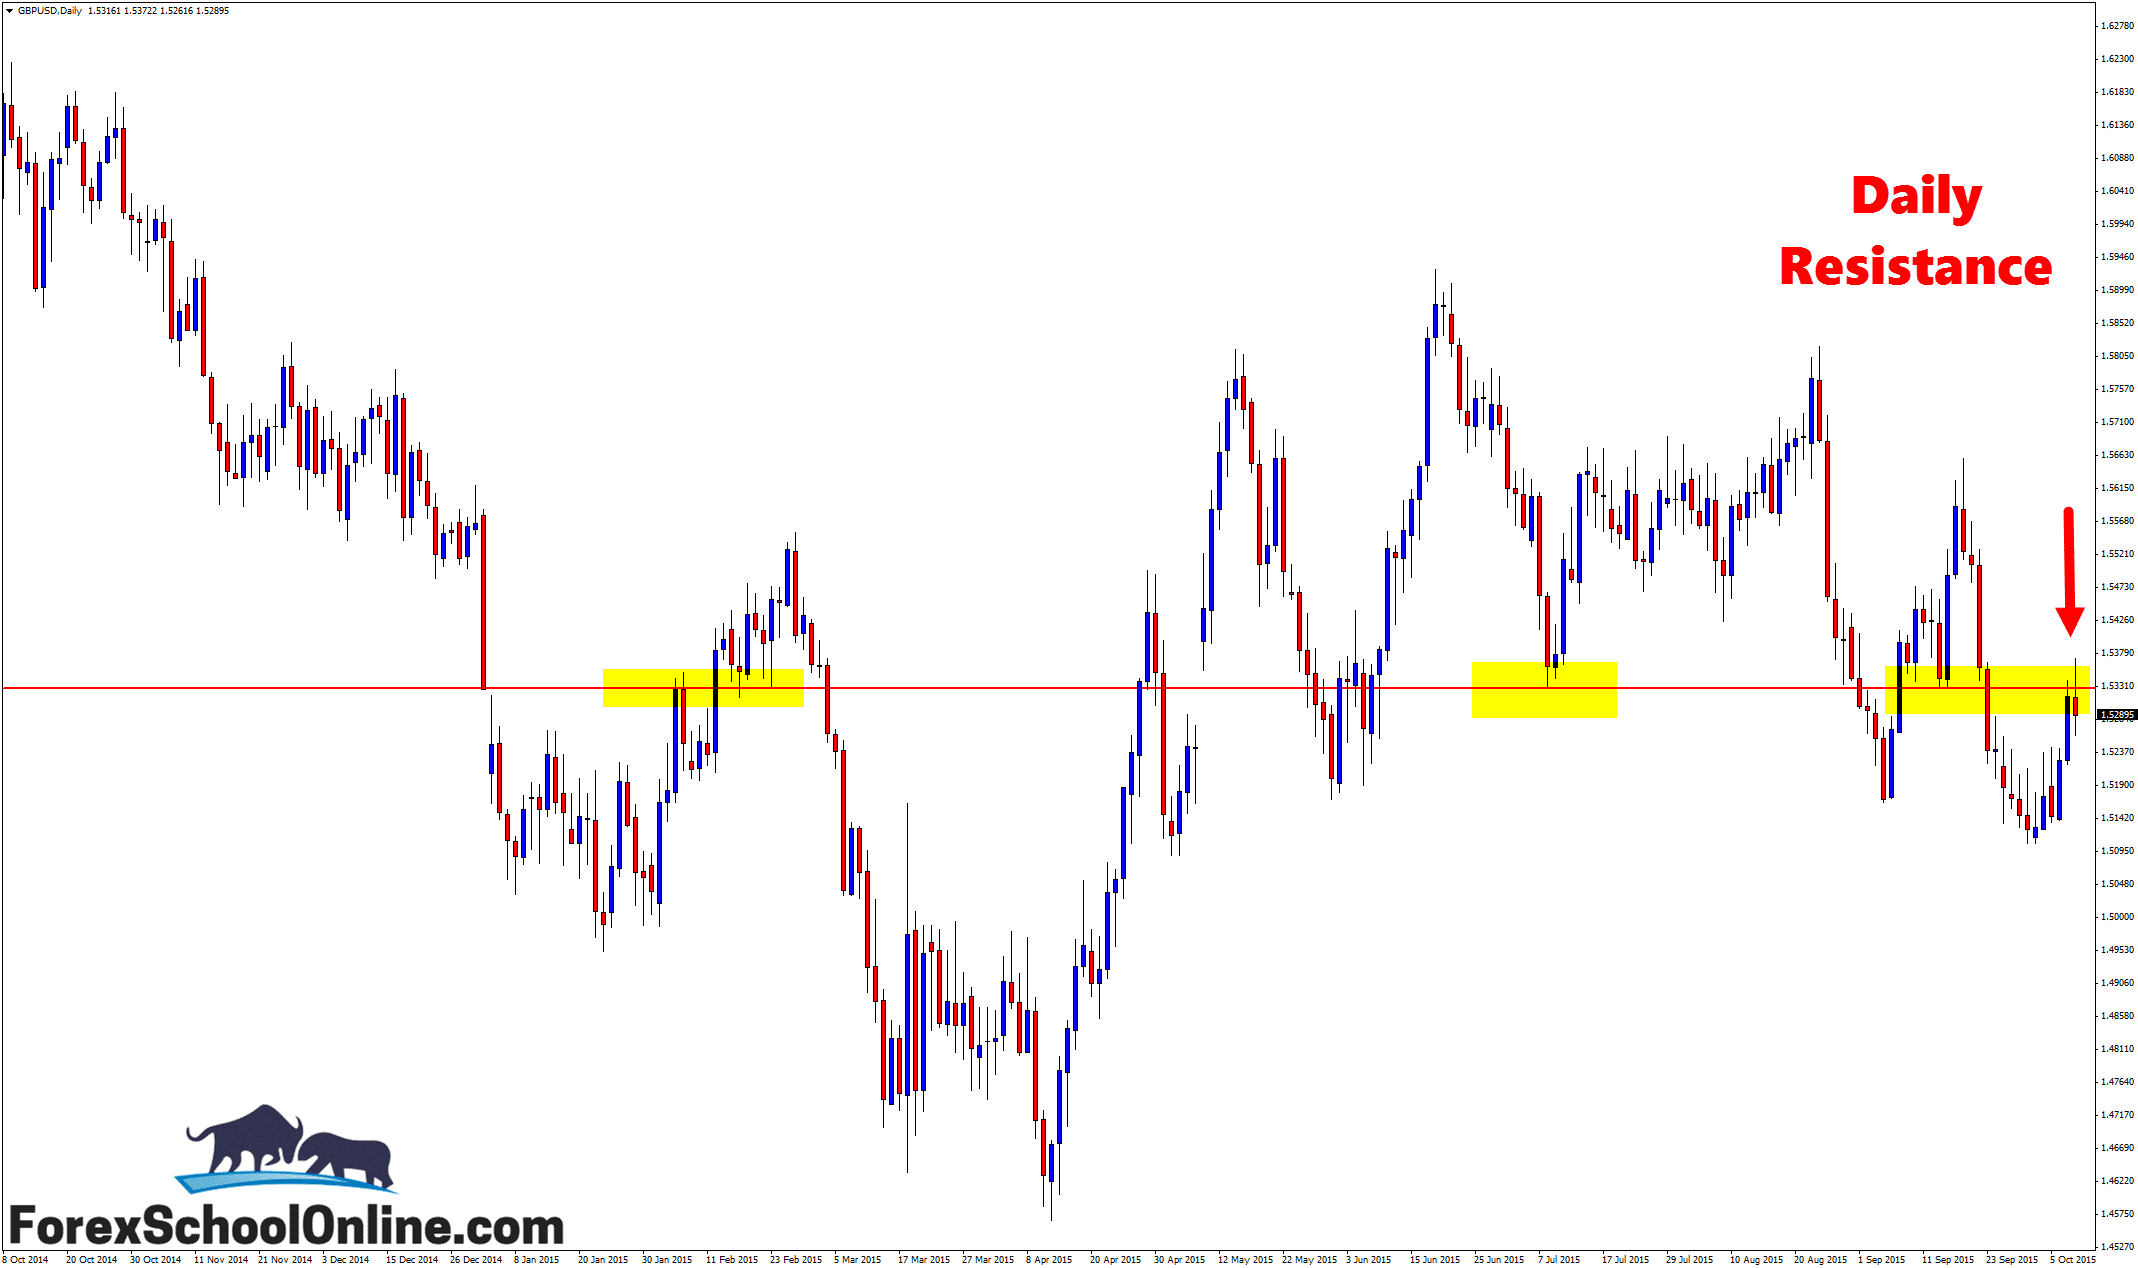 GBPUSD Daily price action chart